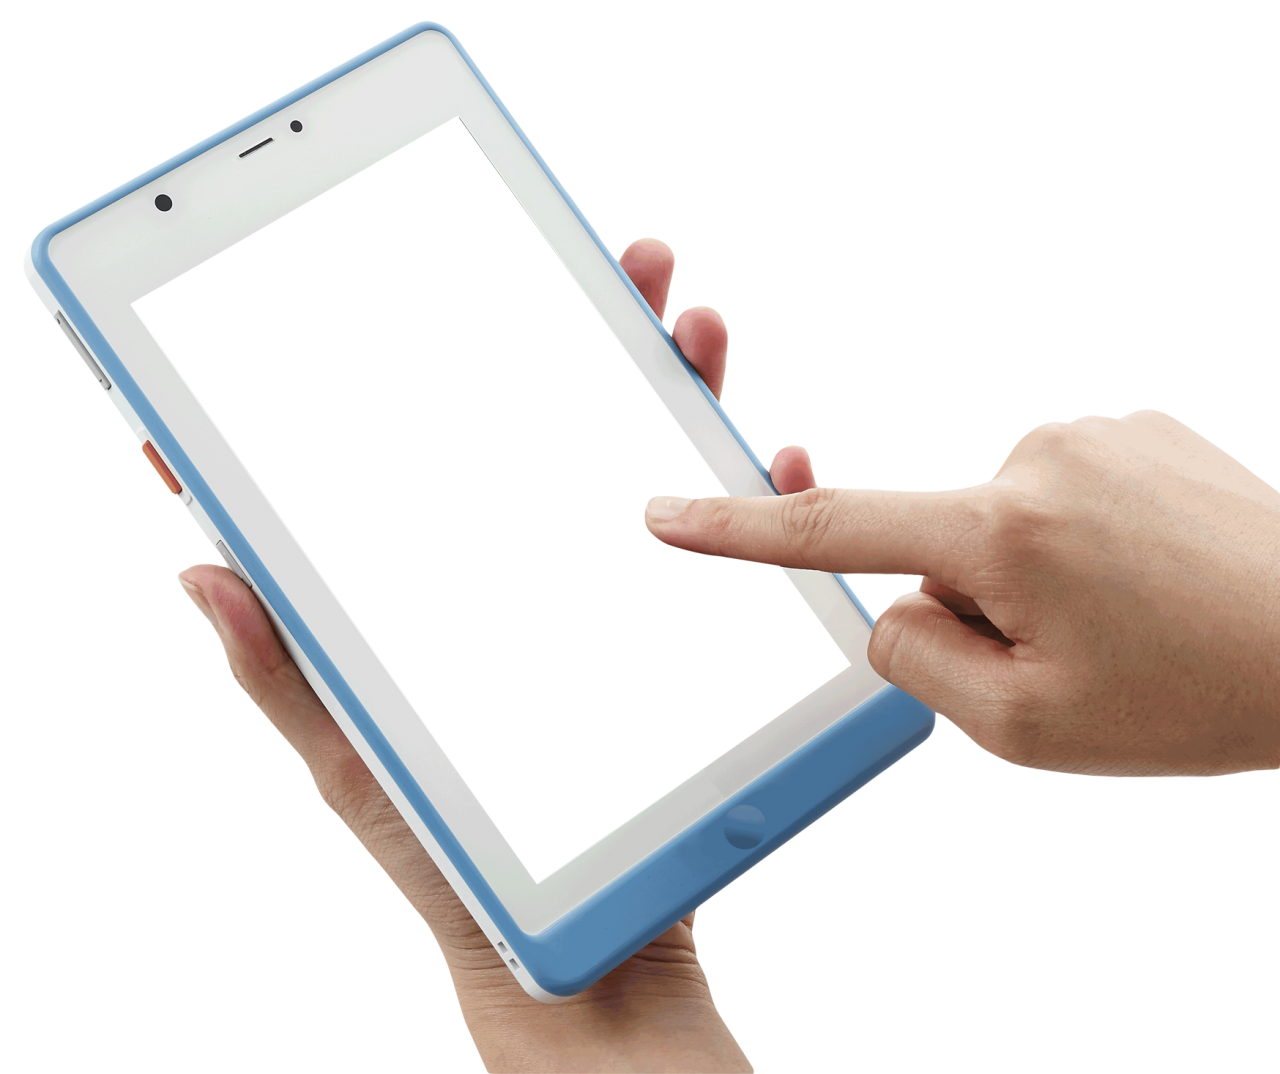 Ipad Finger Touch Png Image Purepng Free Transparent Cc0 Png Image